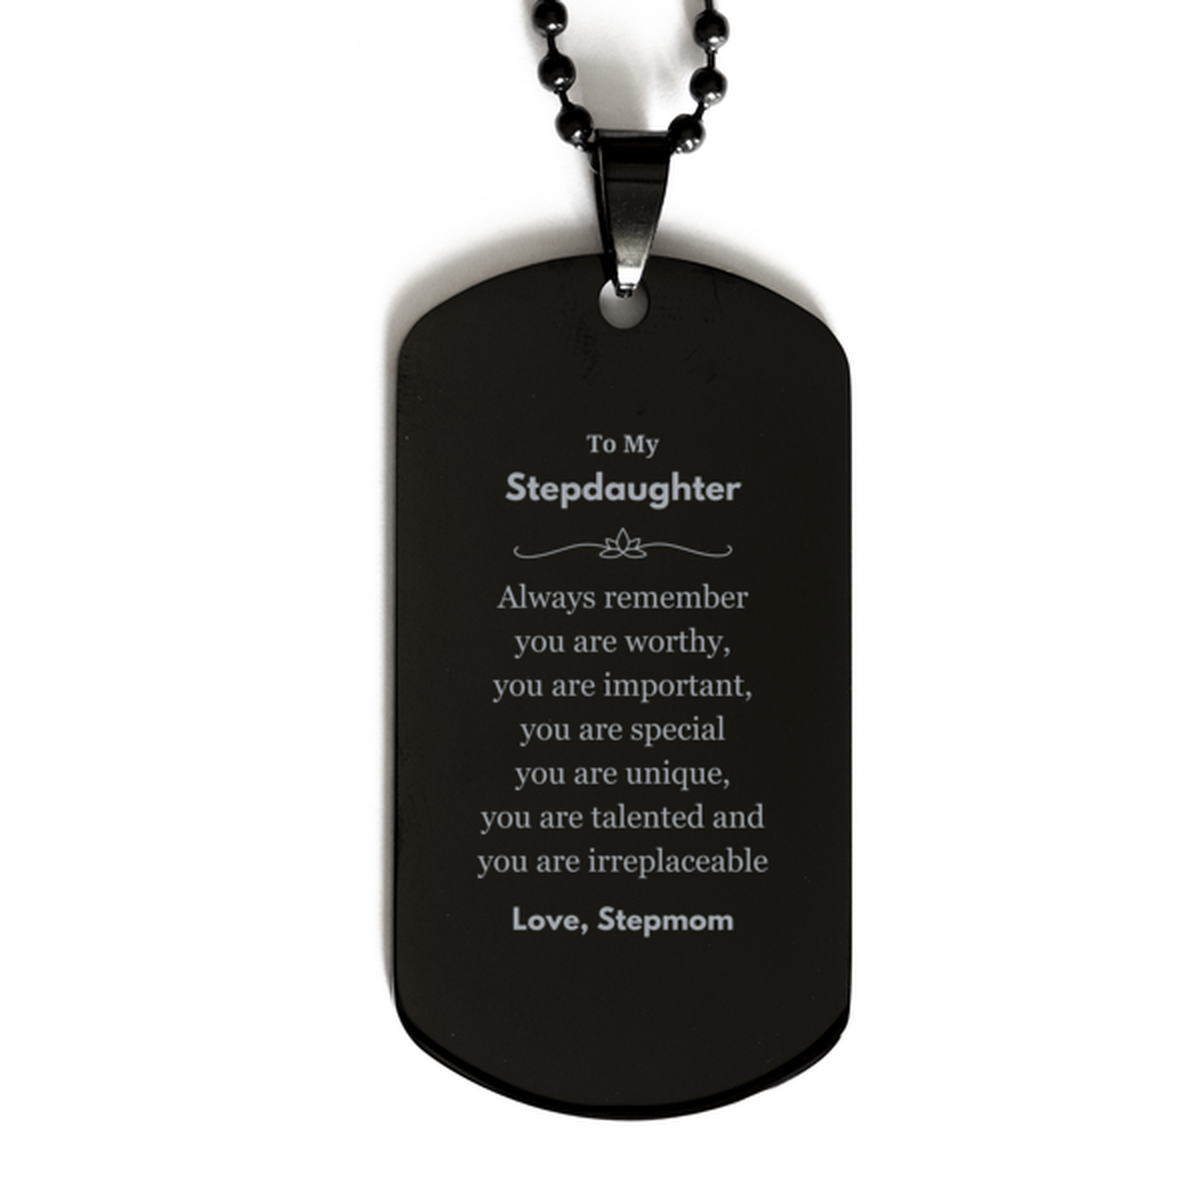 Stepdaughter Birthday Gifts from Stepmom, Inspirational Black Dog Tag for Stepdaughter Christmas Graduation Gifts for Stepdaughter Always remember you are worthy, you are important. Love, Stepmom